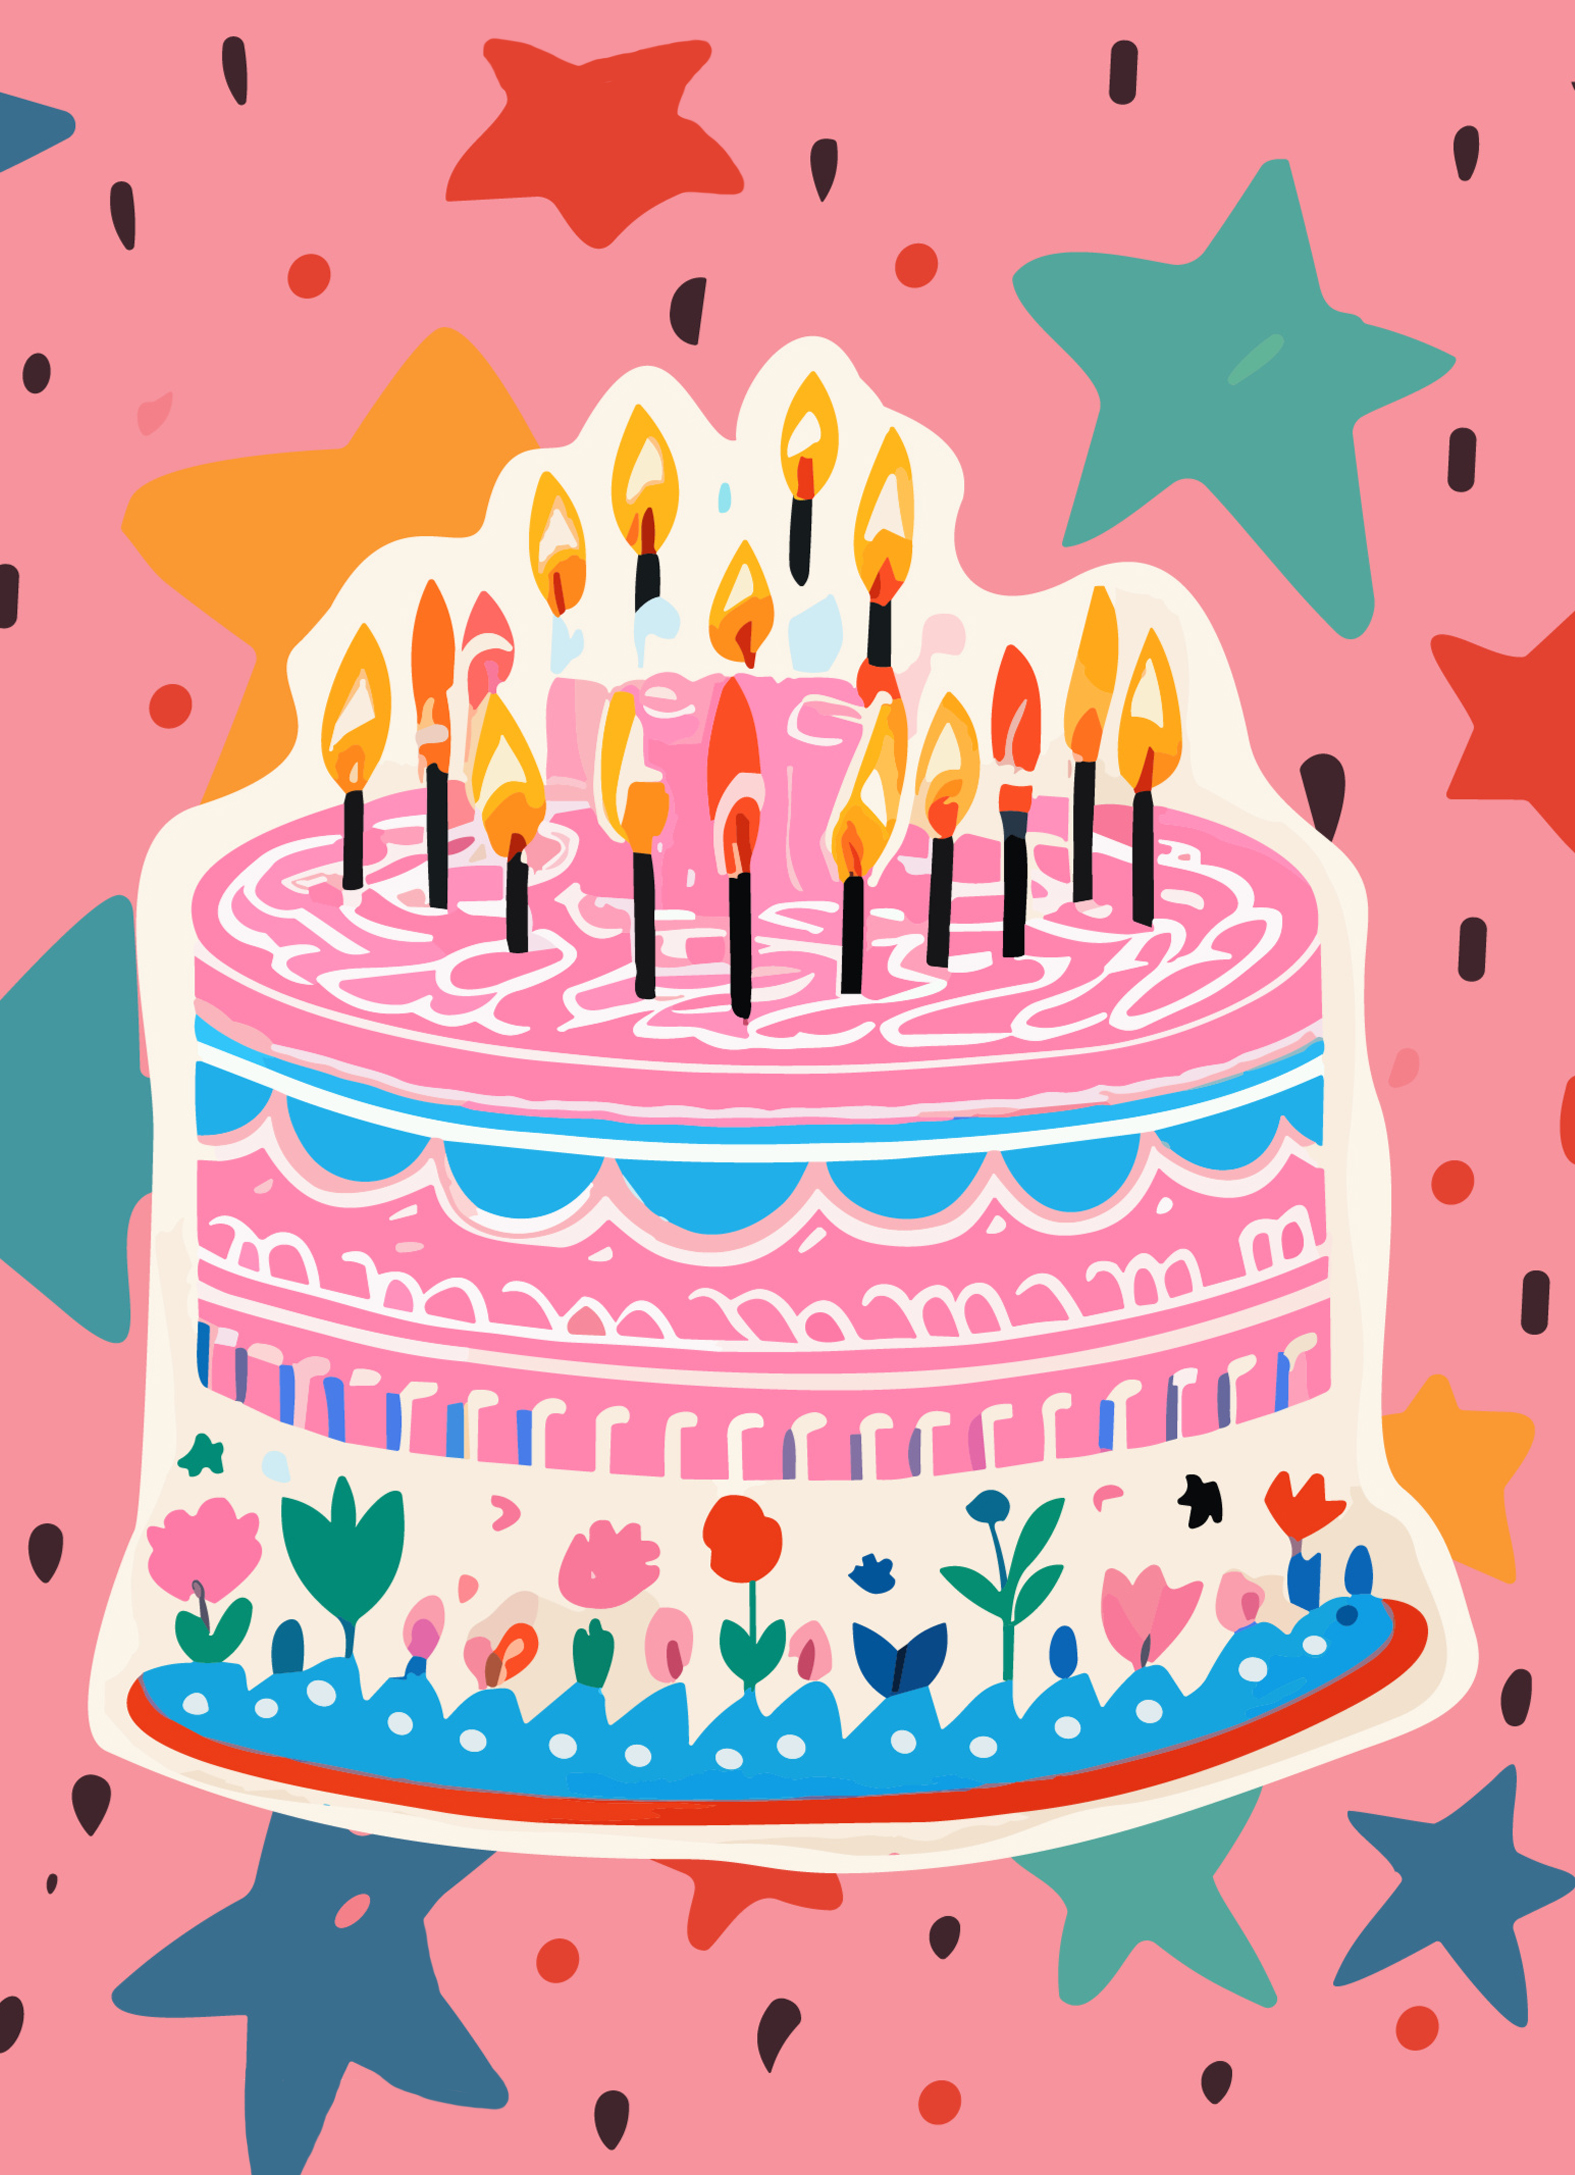 Happiest Birthday Wishes  Card Cover